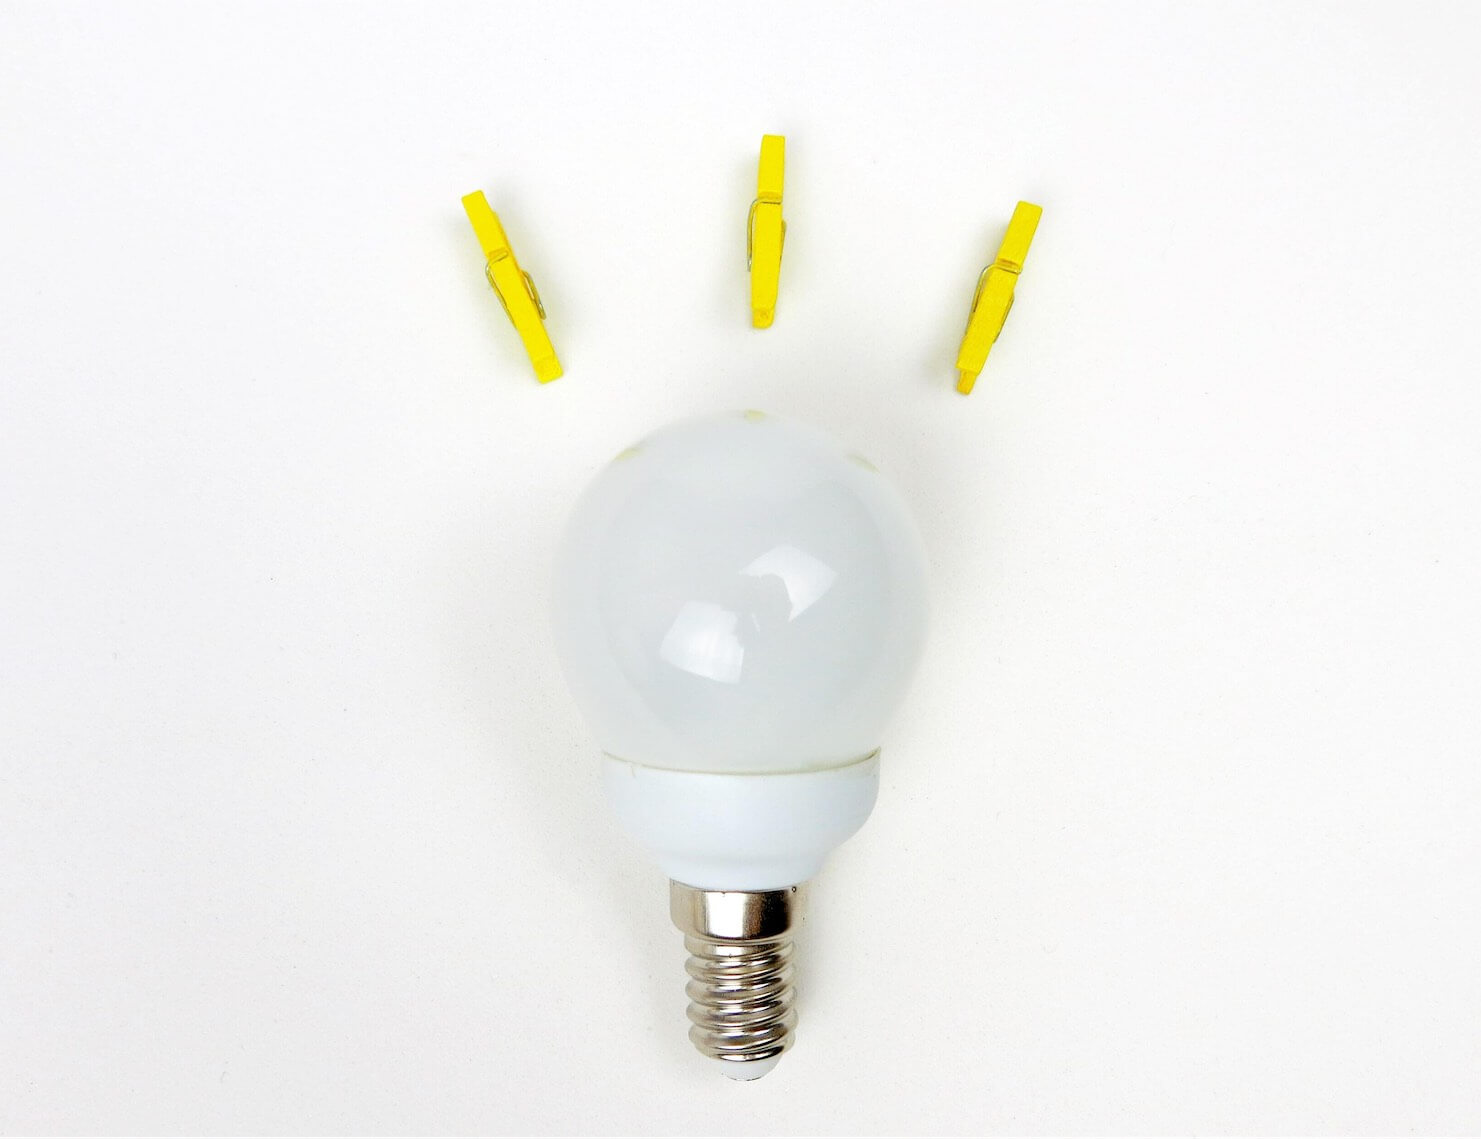 A light bulb on a white background, yellow pegs used to represent the light coming from the bulb.